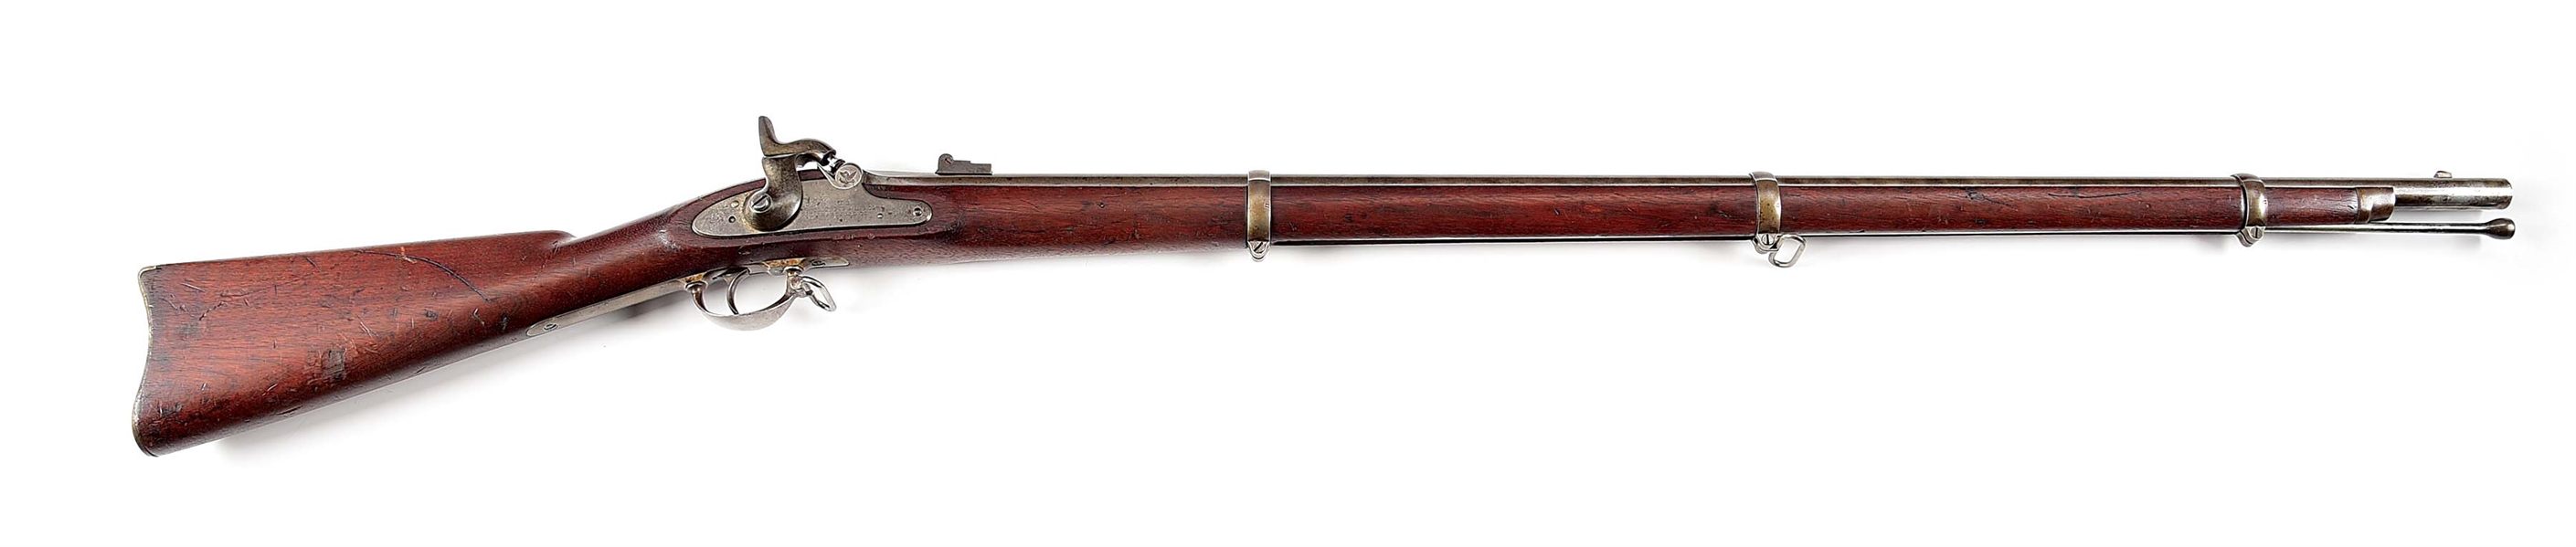 (A) COLT 1861 SPECIAL RIFLED MUSKET DATED 1864.